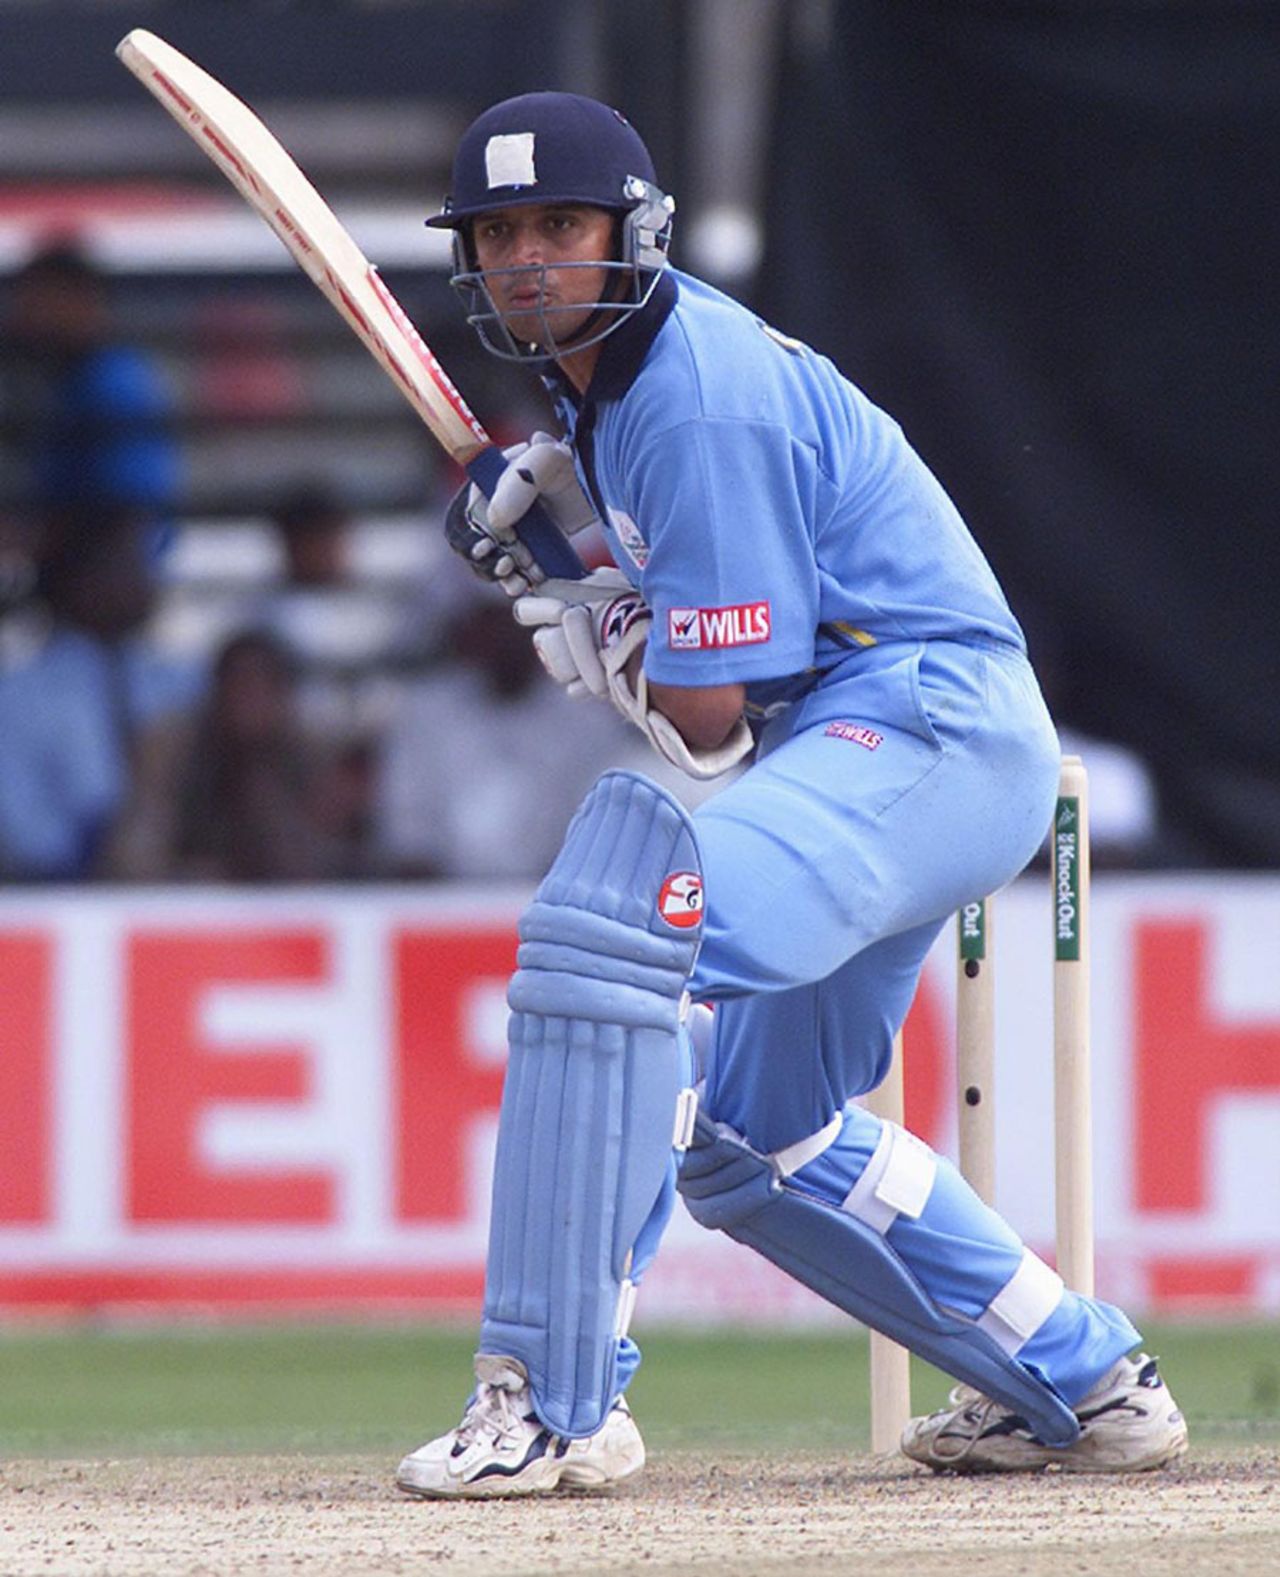 India's batsman Rahul Dravid prepares to play the ball from Kenyan Tony Sunji during the opening game of the ICC KnockOut. Kenya went out for 208 runs for 8 in 50 over. ICC KnockOut, 2000/01, Preliminary Quarter Final, Kenya v India, Gymkhana Club Ground, Nairobi, 3 October 2000.